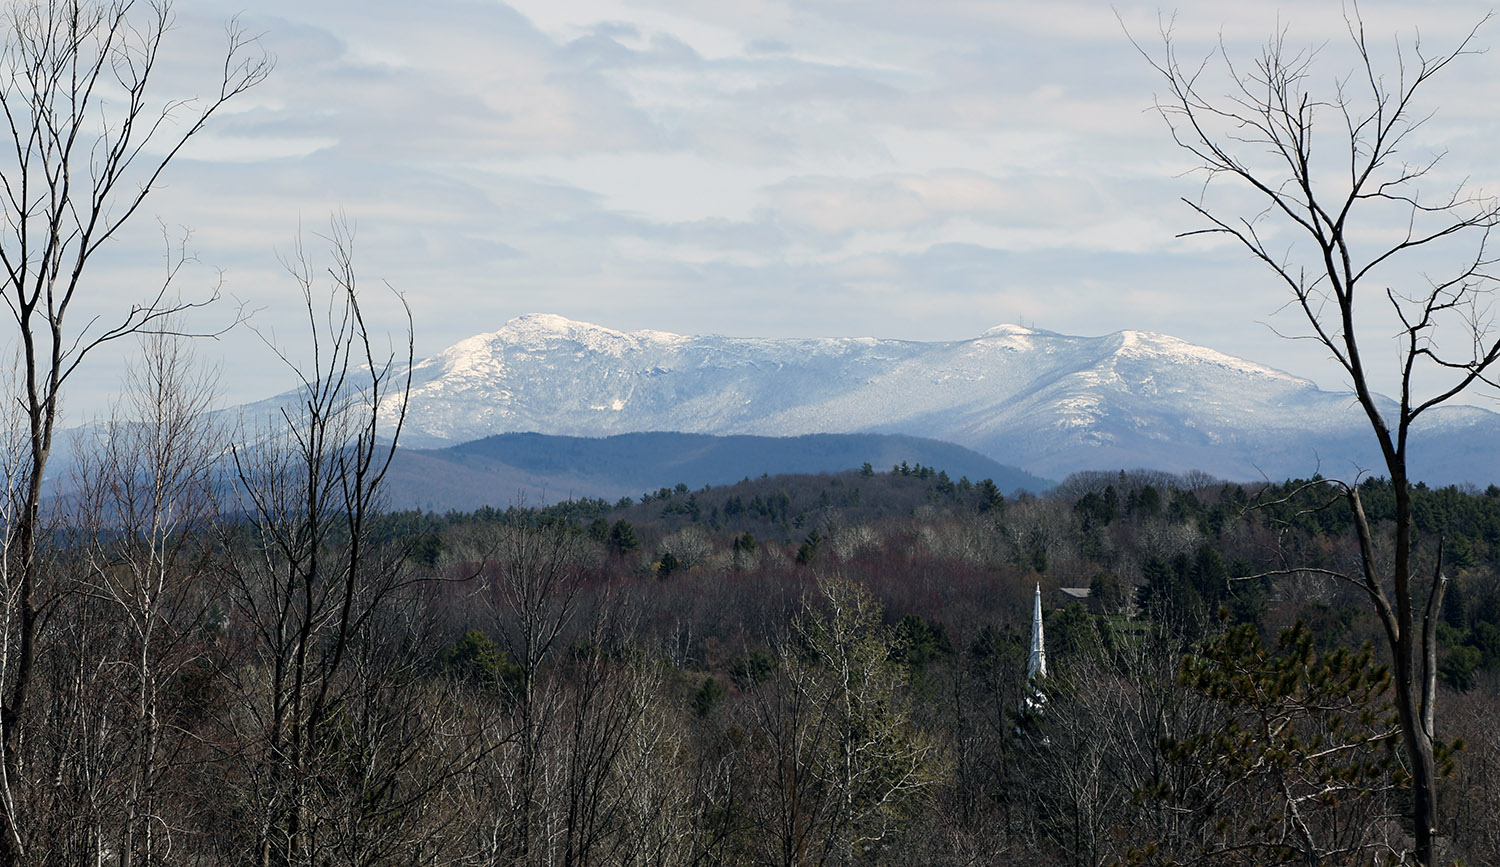 An image taken from Interstate 89 of Mount Mansfield in Vermont covered with snow after a late-April snowstorm